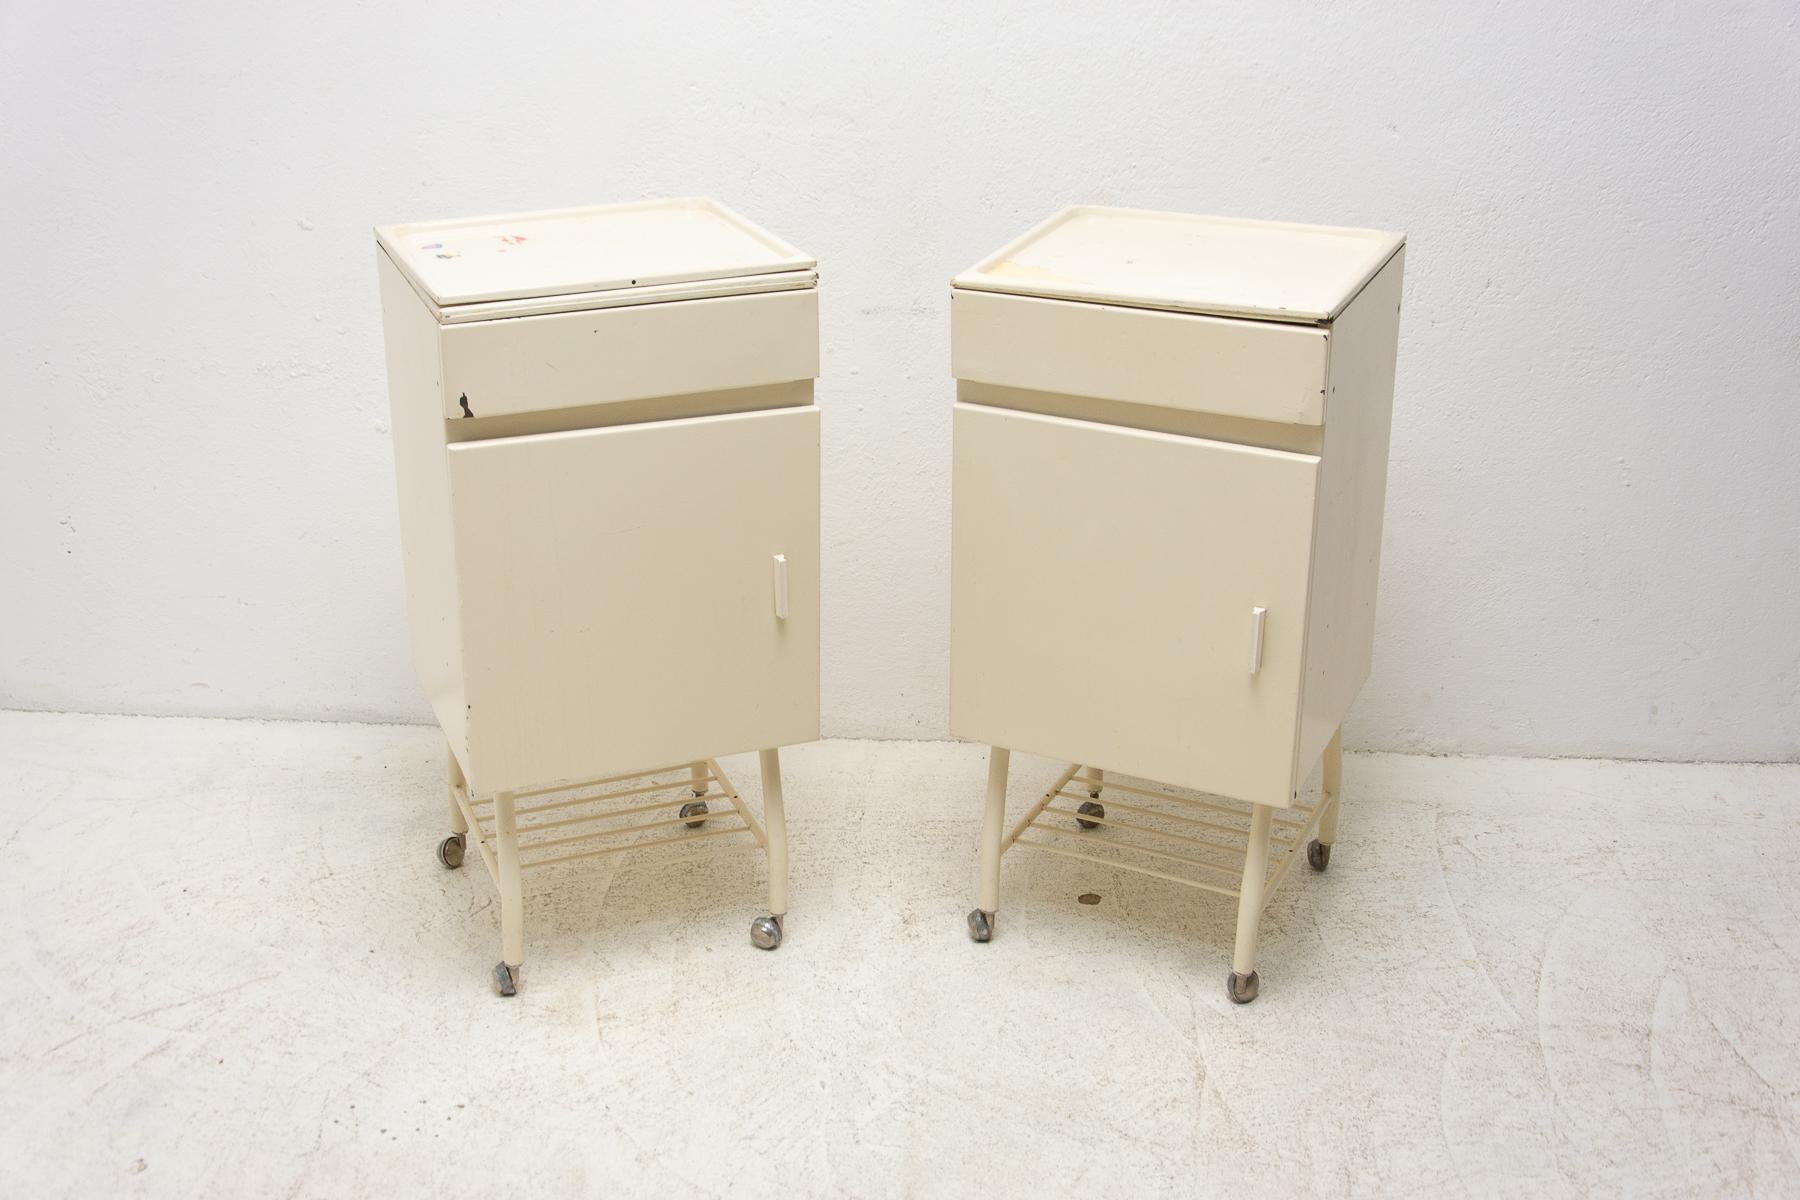 A pair of night stands in a industrial style. Made in the former Czechoslovakia in the 1970s. It's made of lacqured sheet metal.
Overall in good condition, showing signs of age and using. Price is for the pair.

Price is for the pair.

Measure: